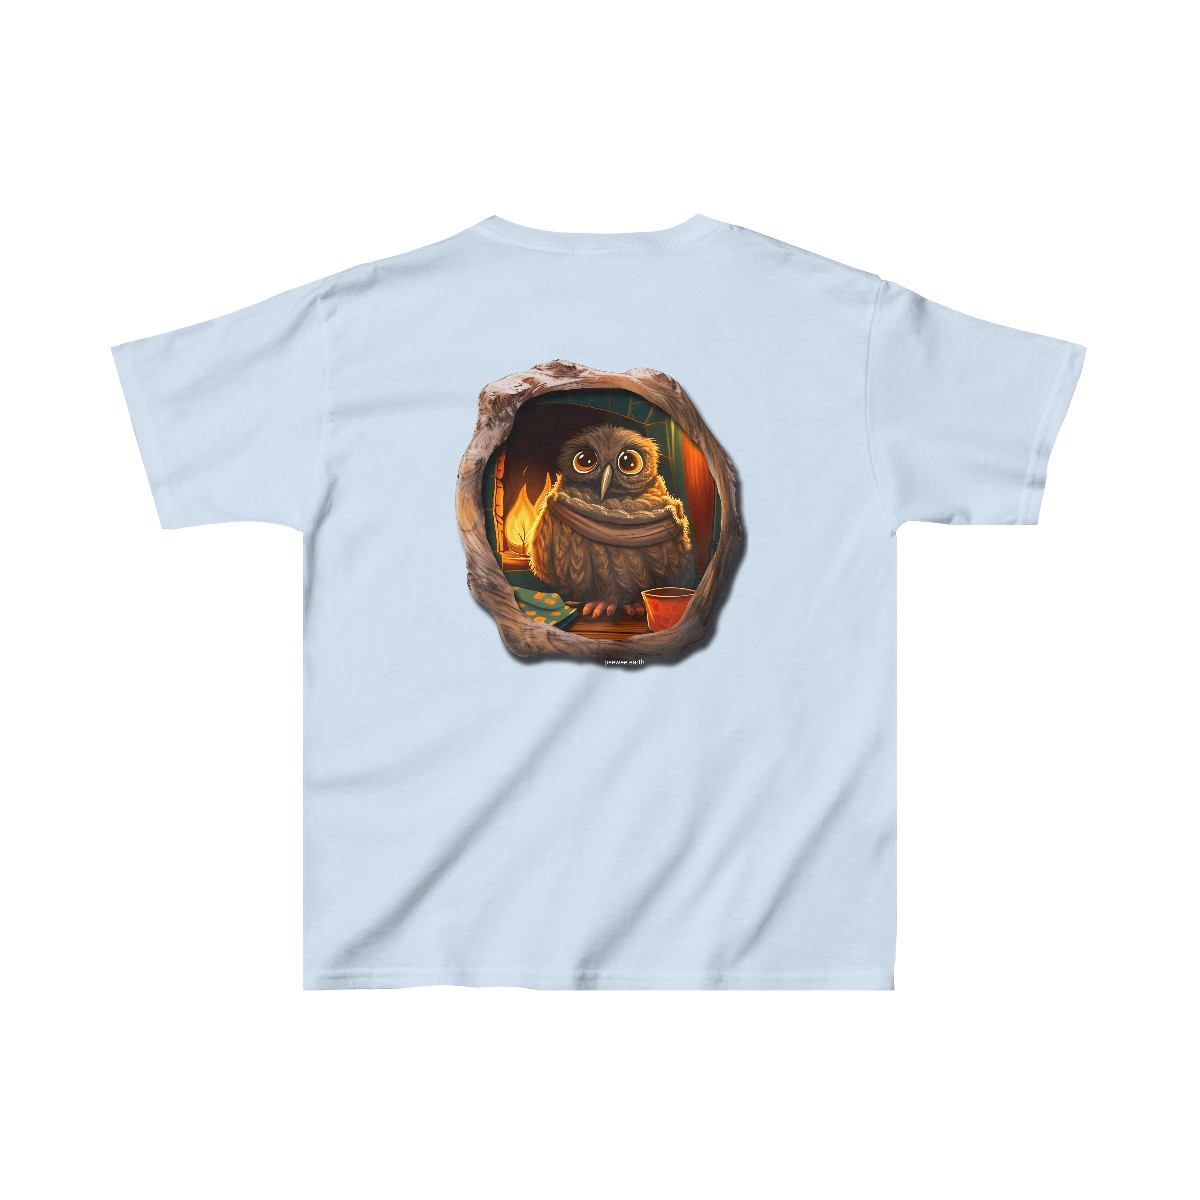 Official Peewee the Potoo youth t-shirt - Comfy Peewee product thumbnail image